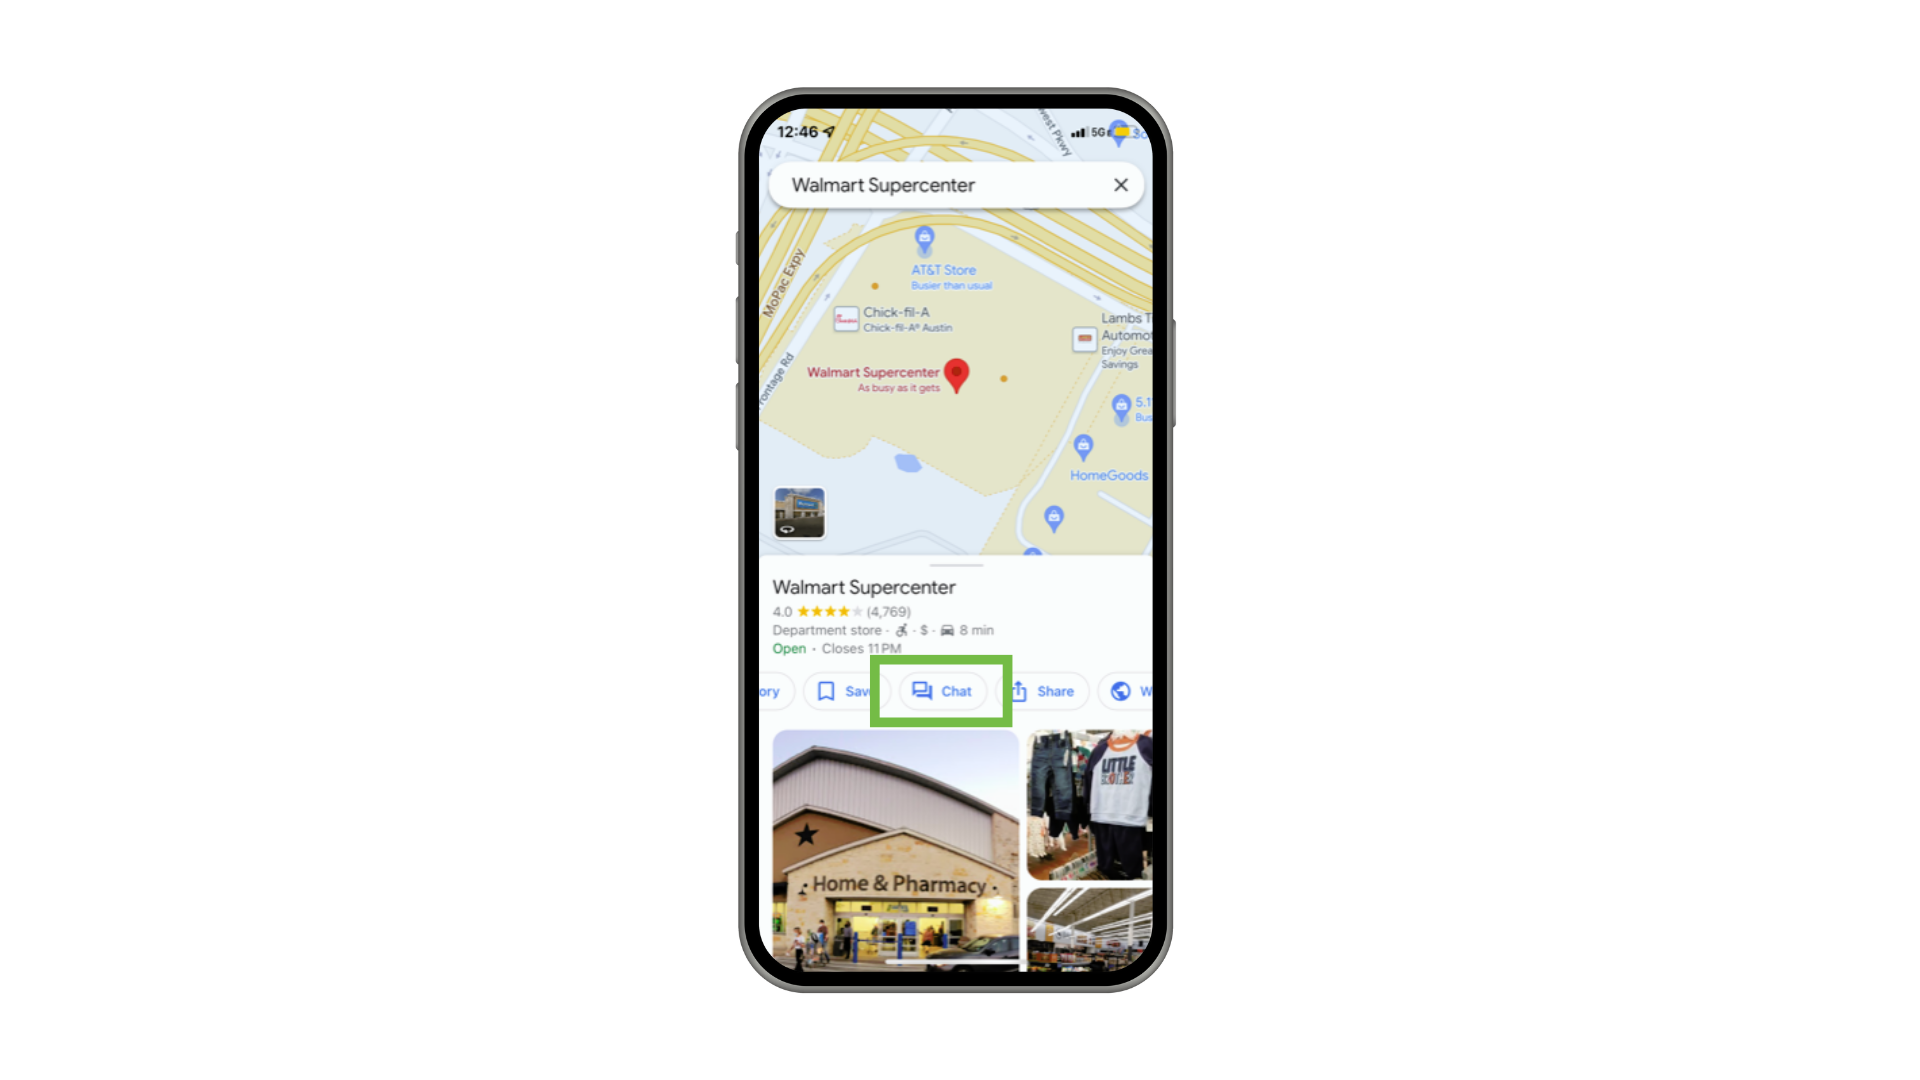 An image highlighting the chat functionality within Google Maps for Walmart